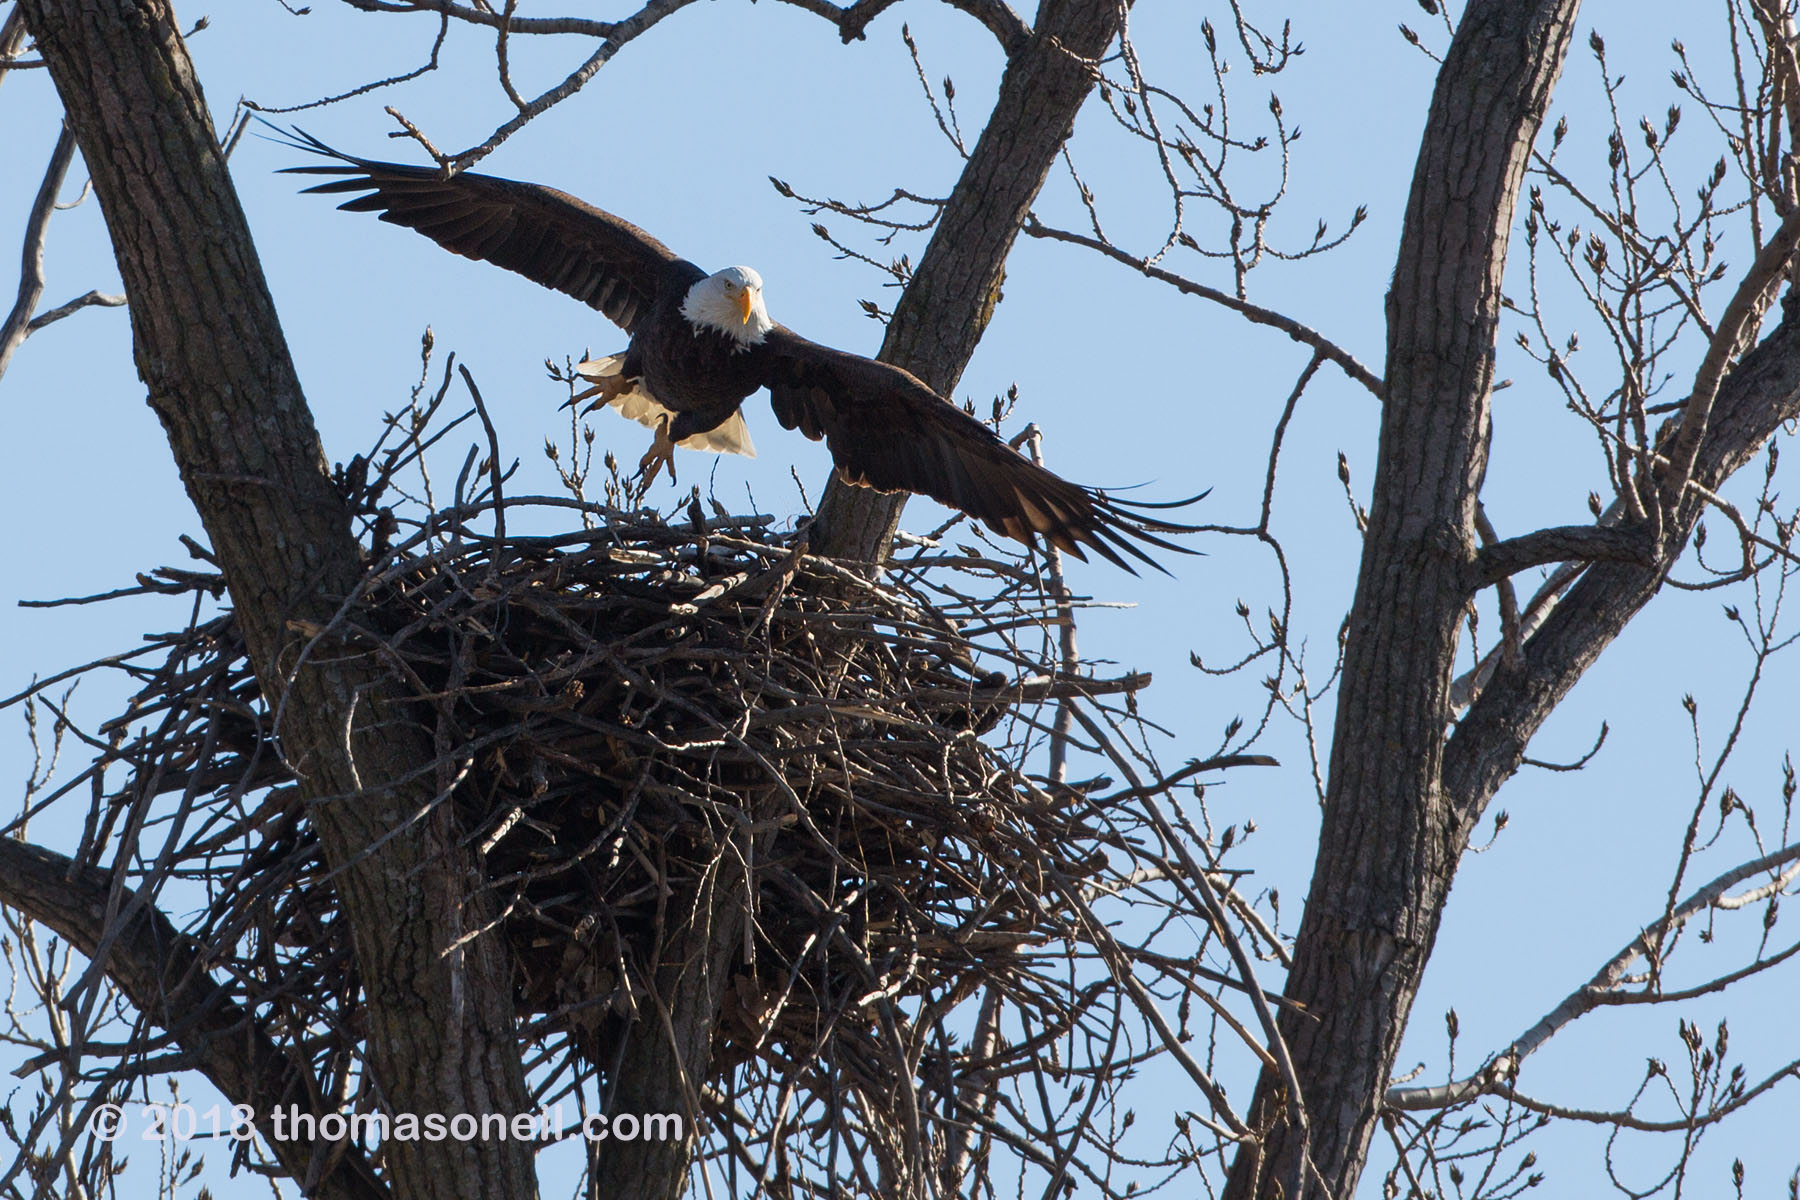 Bald eagle leaves the nest, Loess Bluffs National Wildlife Refuge, Missouri.  Click for next photo.